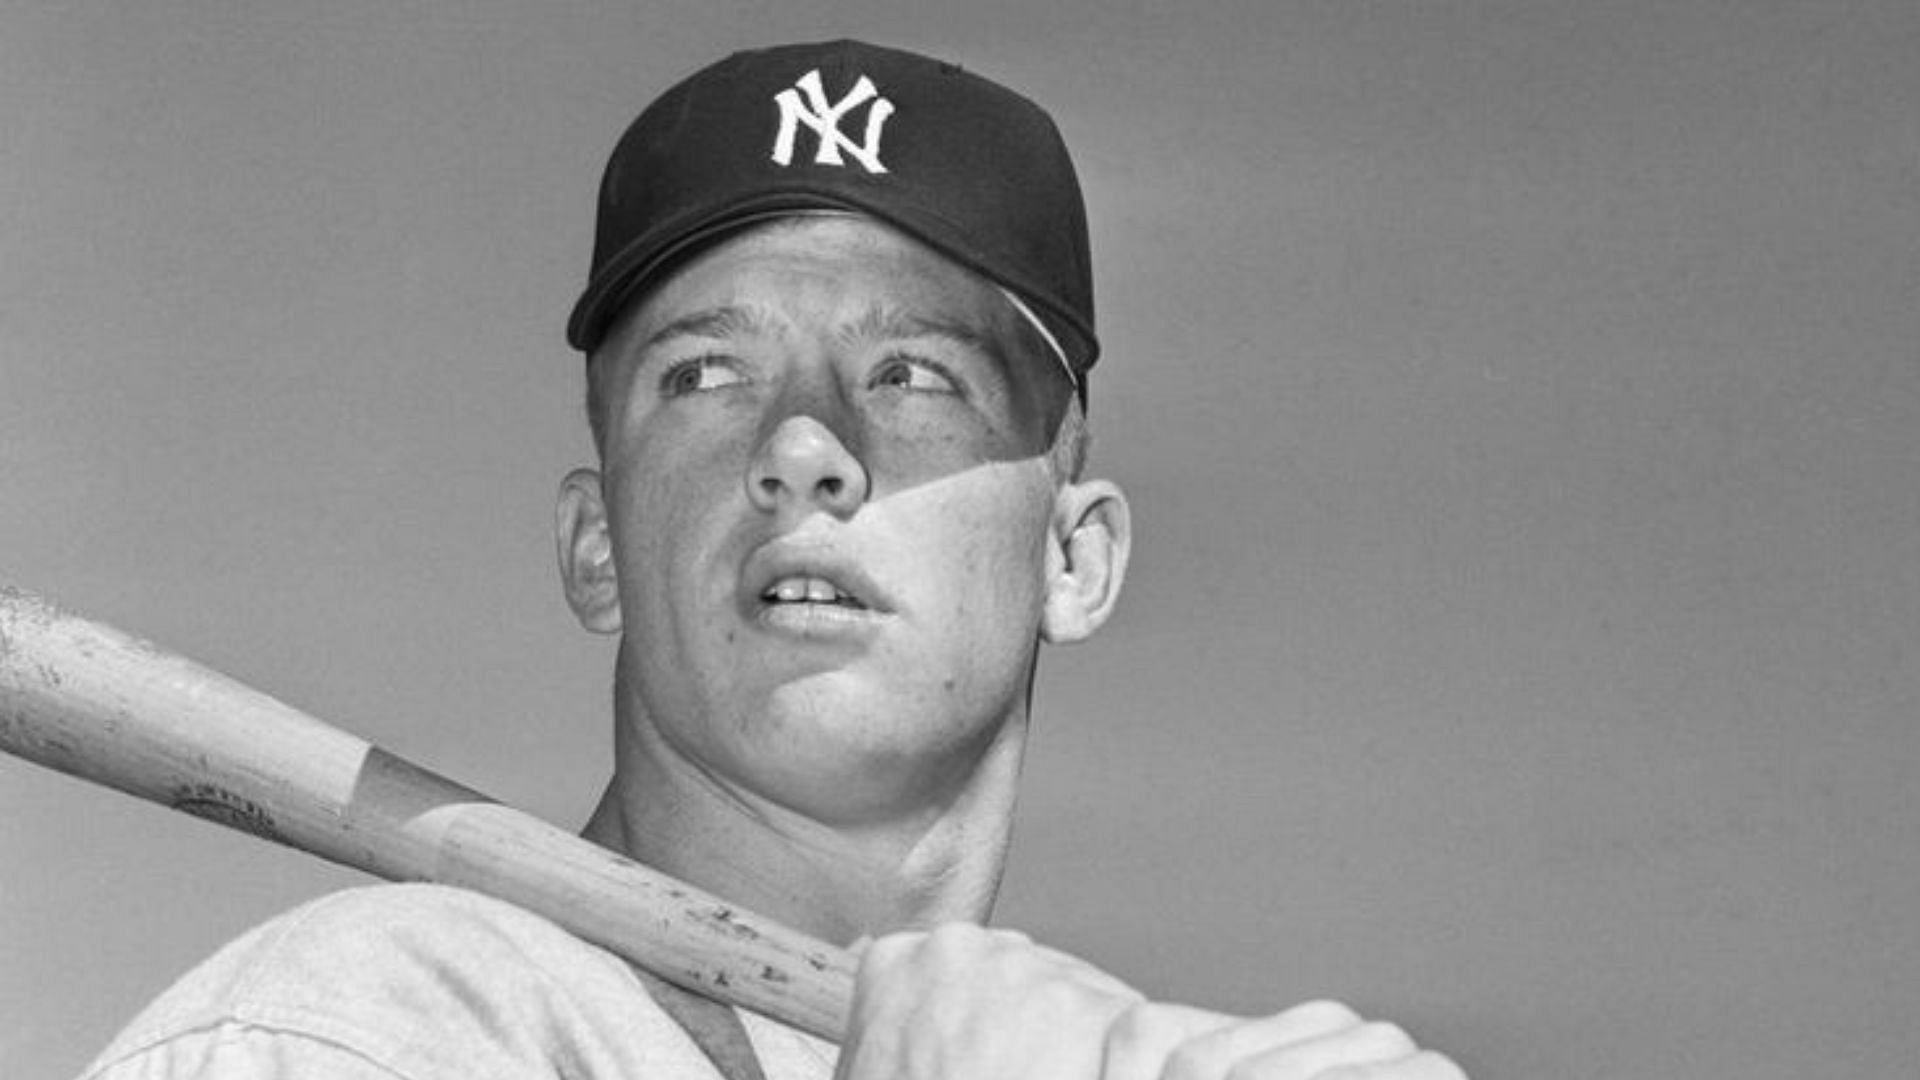 Former New York Yankees player Mickey Mantle.